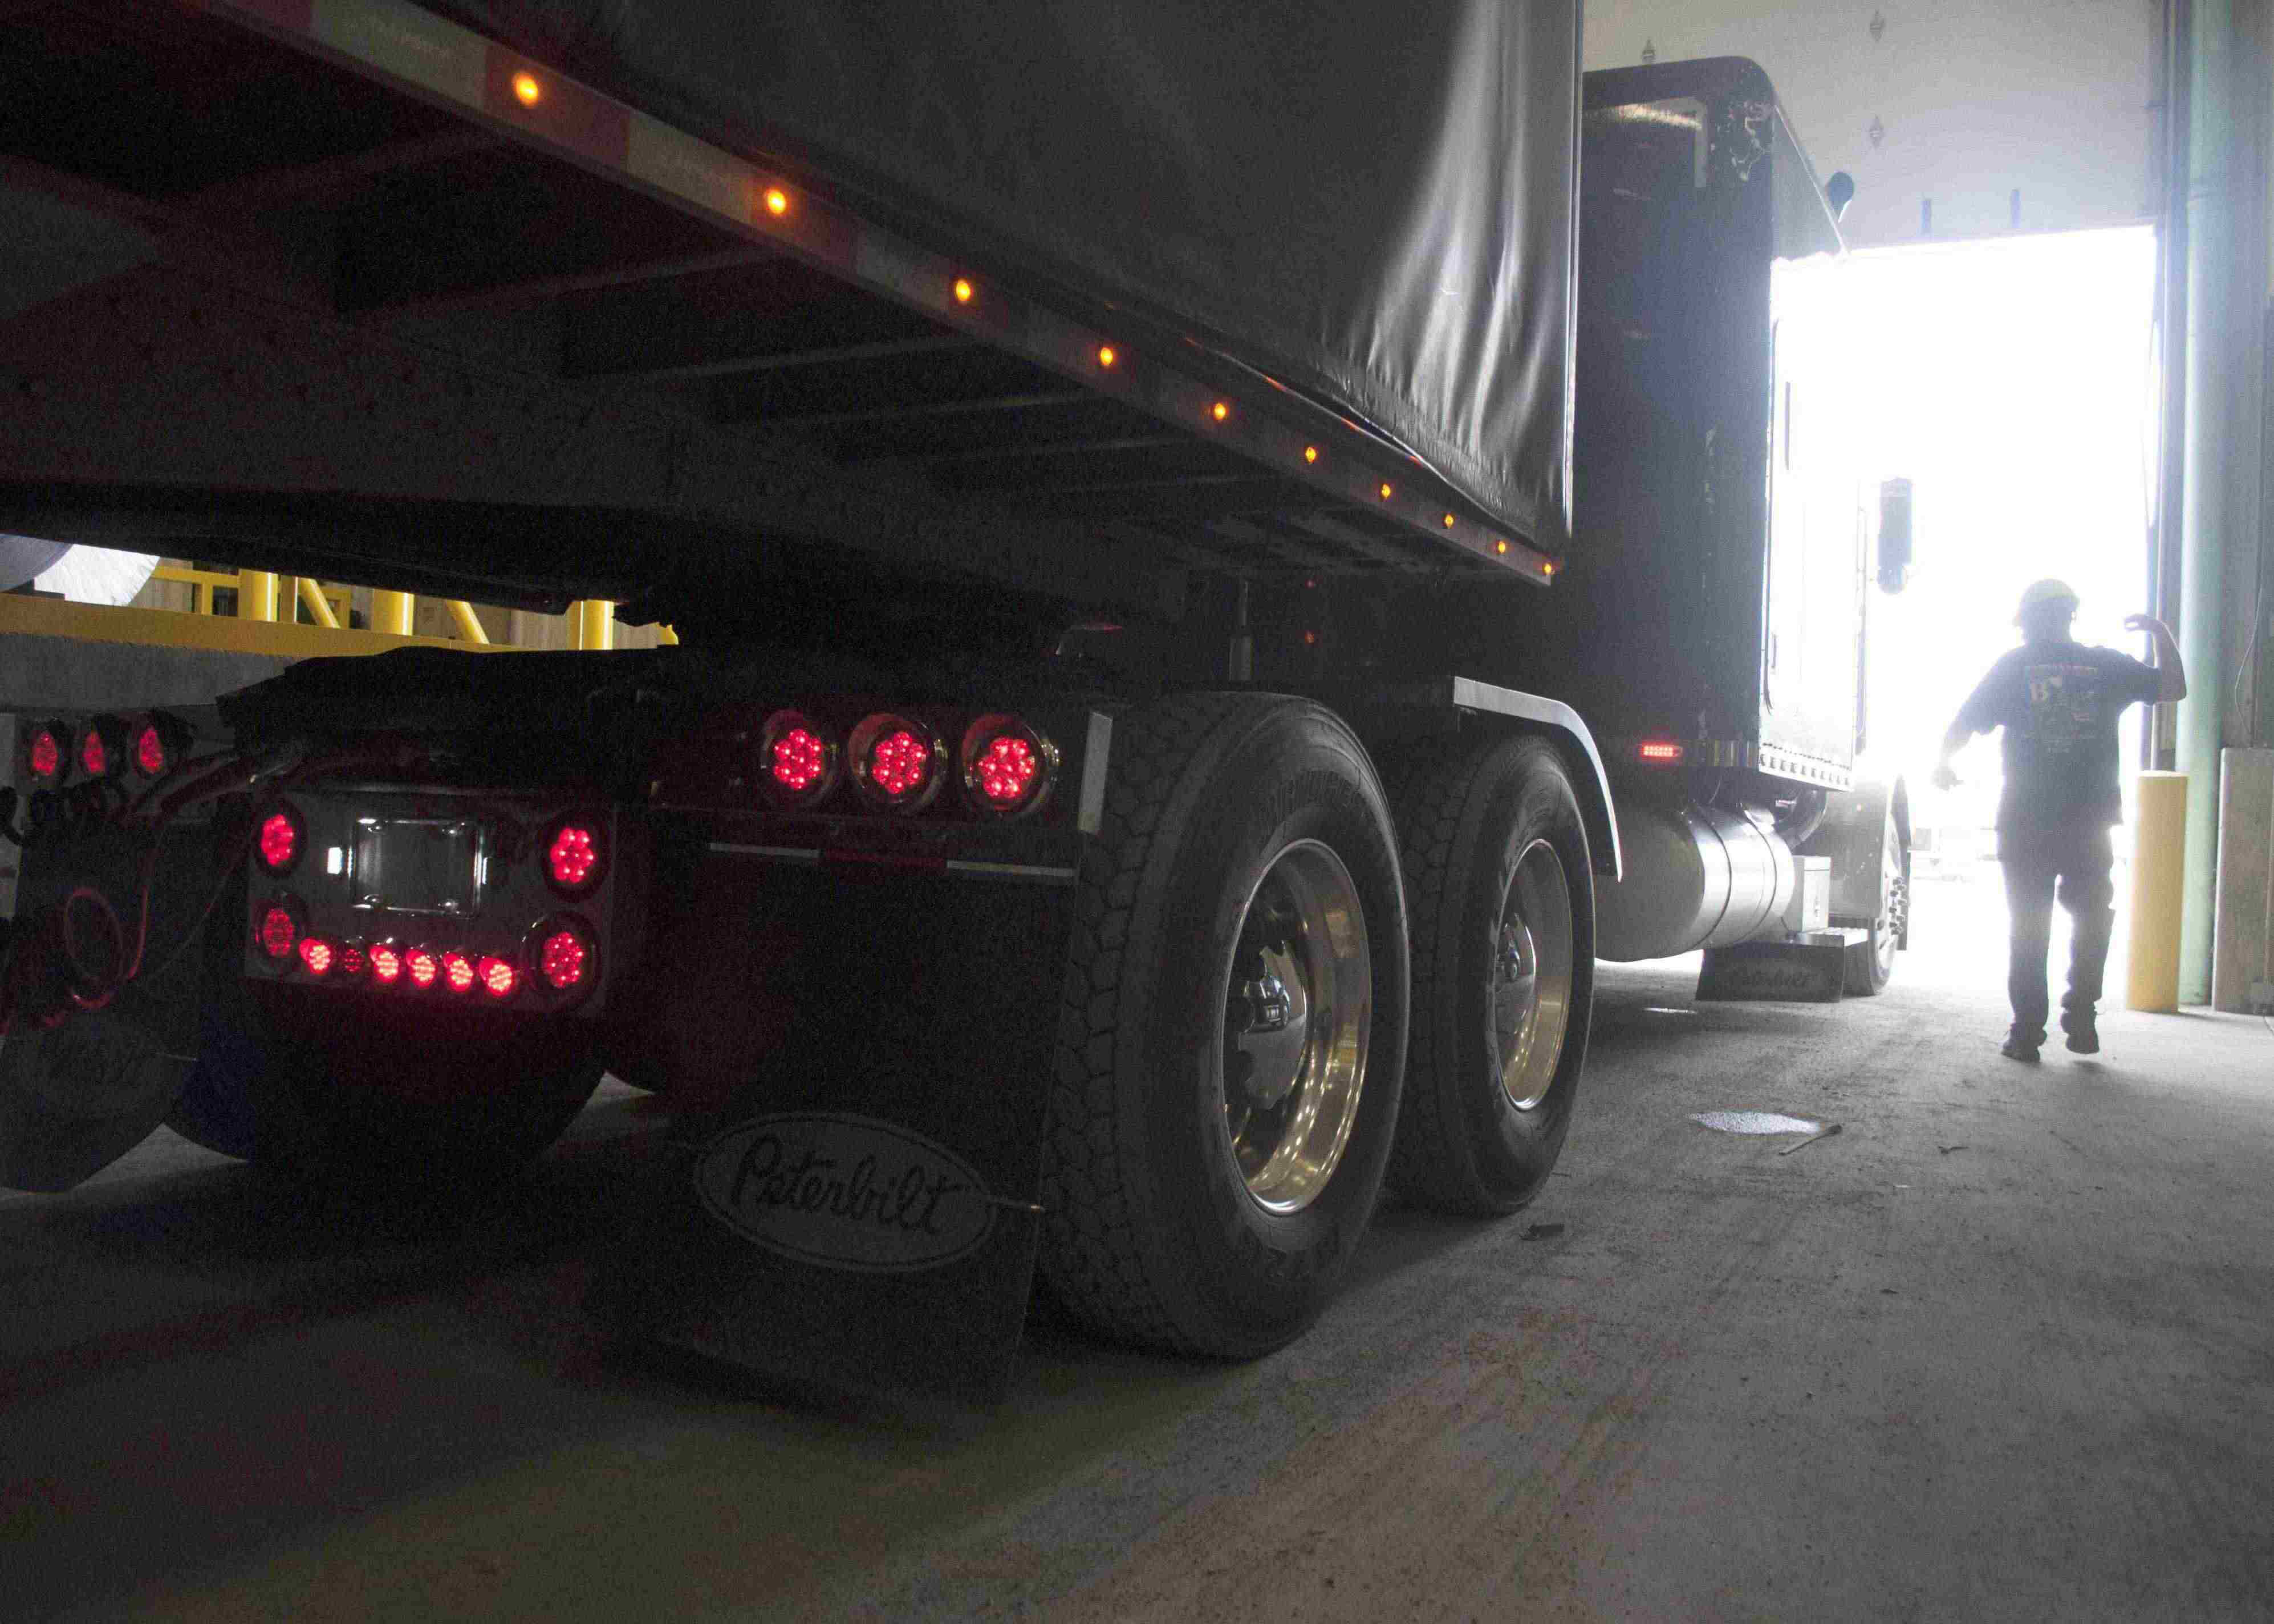 FMCSA seeks data from truckers on detention time